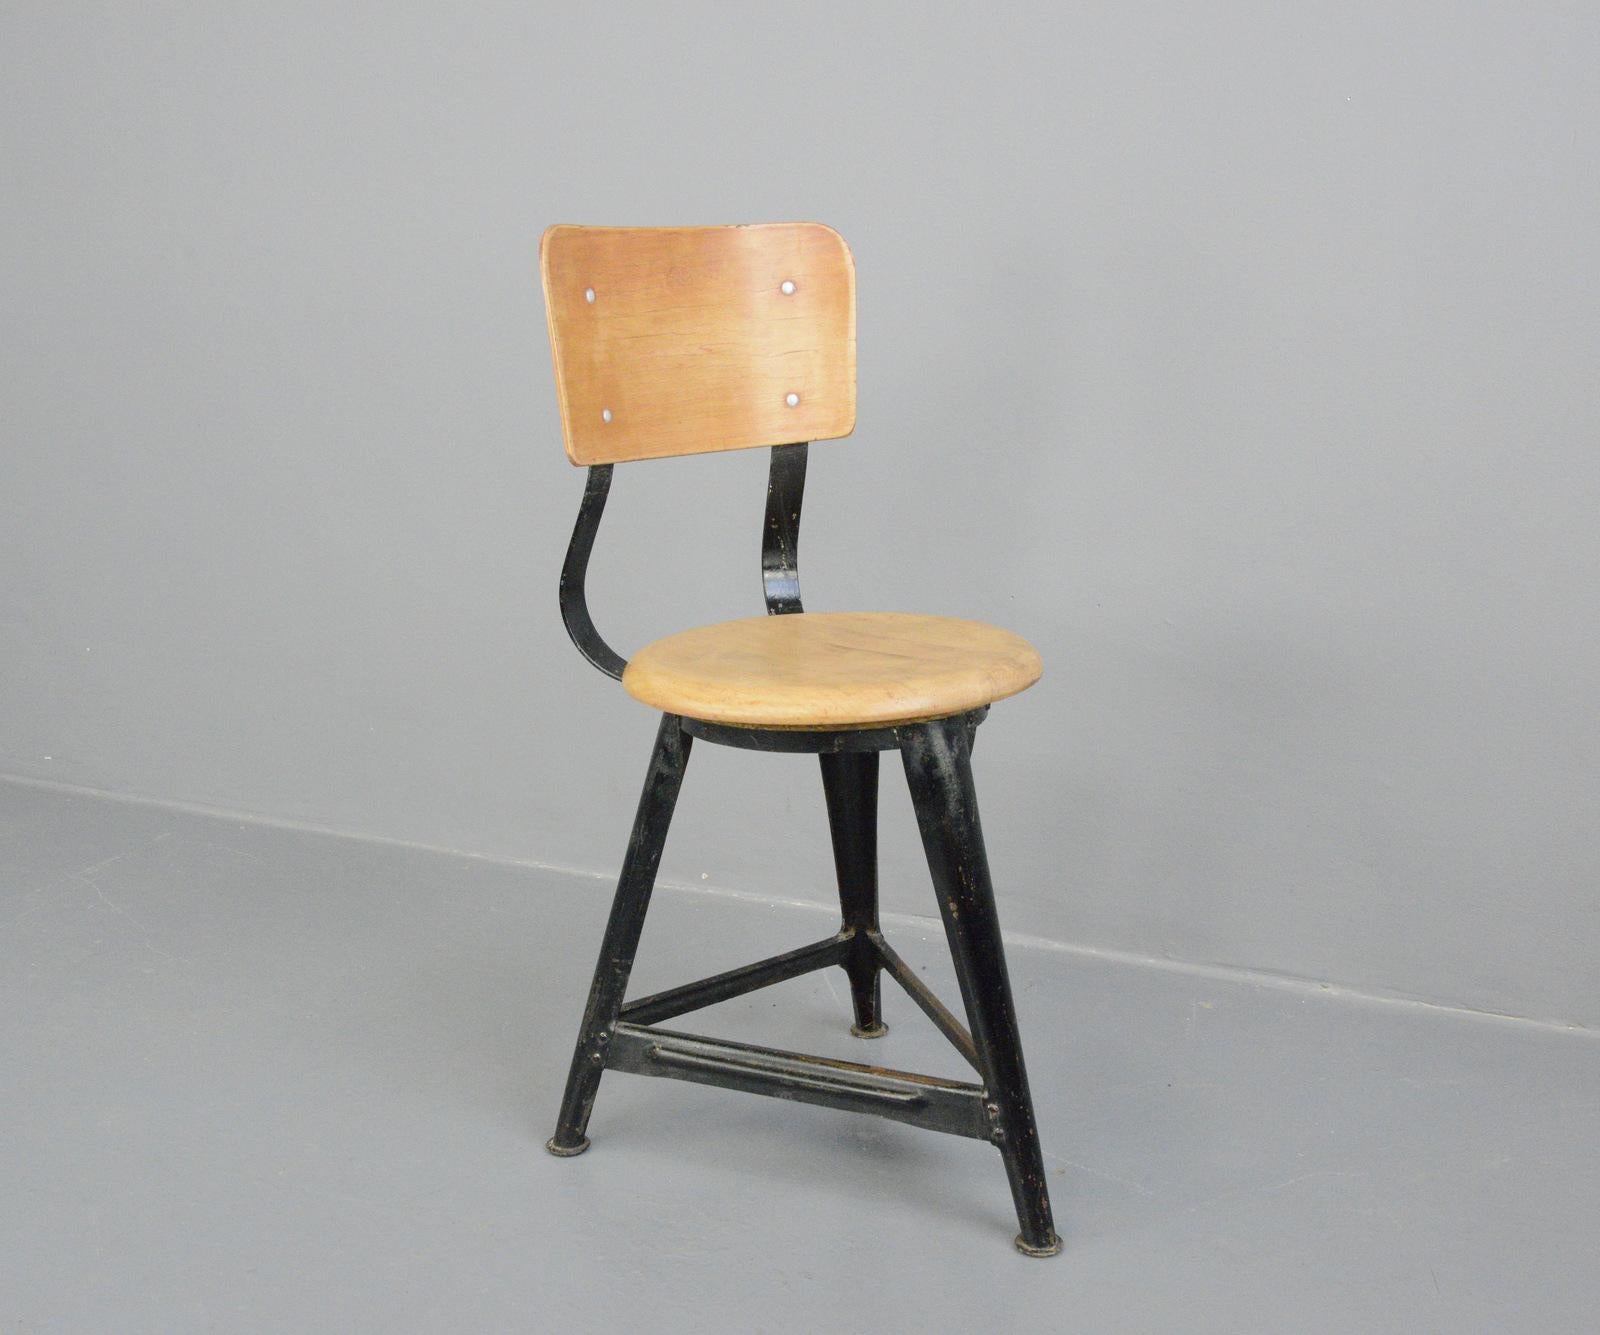 Industrial work stools by Ama, circa 1930s

- Price is per stool
- Steel frame
- Solid Elm seat with ply backrest
- Designed by Albert Menger 
- Produced by Ama, Nordhalben
- German ~ 1930s
- Measures: 35cm wide x 41cm deep 
- 46cm seat